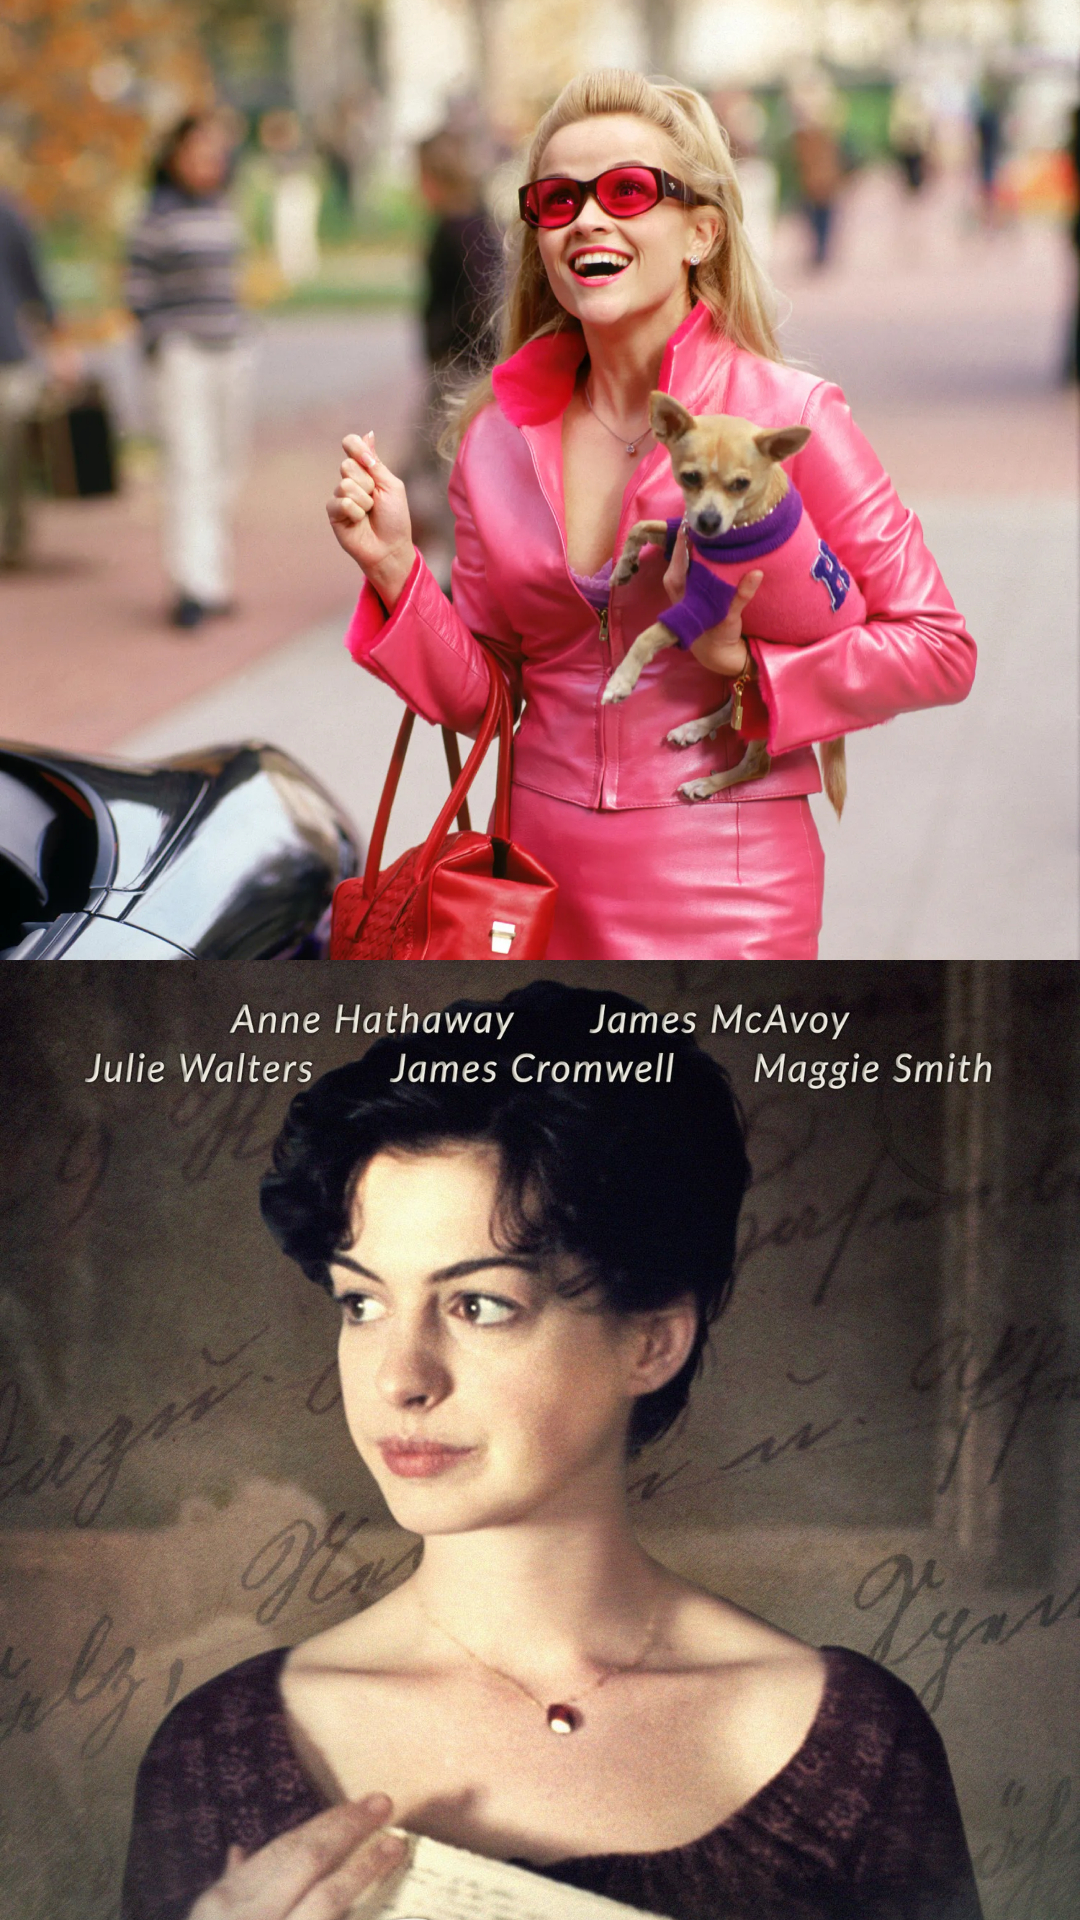 Legally Blonde to Becoming Jane: 7 movies you can watch on Women's Day